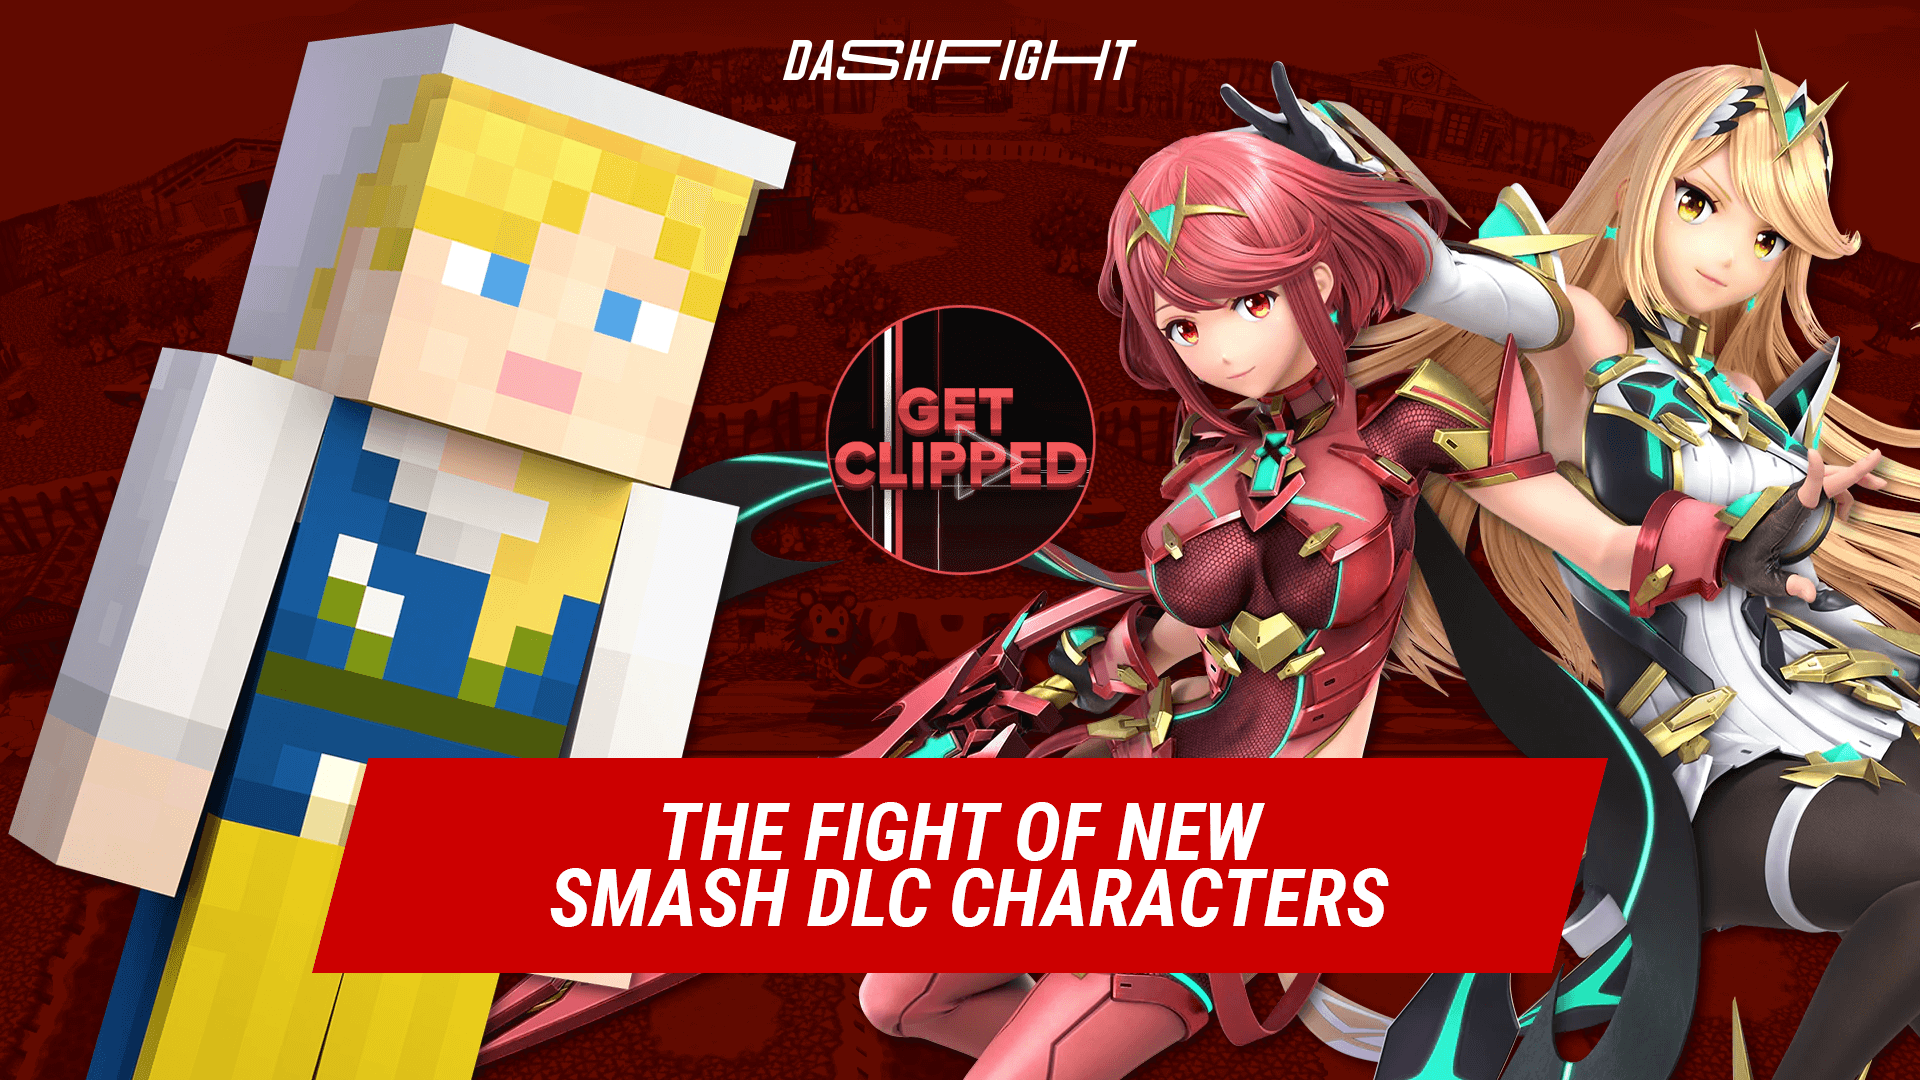 New Smash DLC Fighters In the Finals of Get Clipped #10